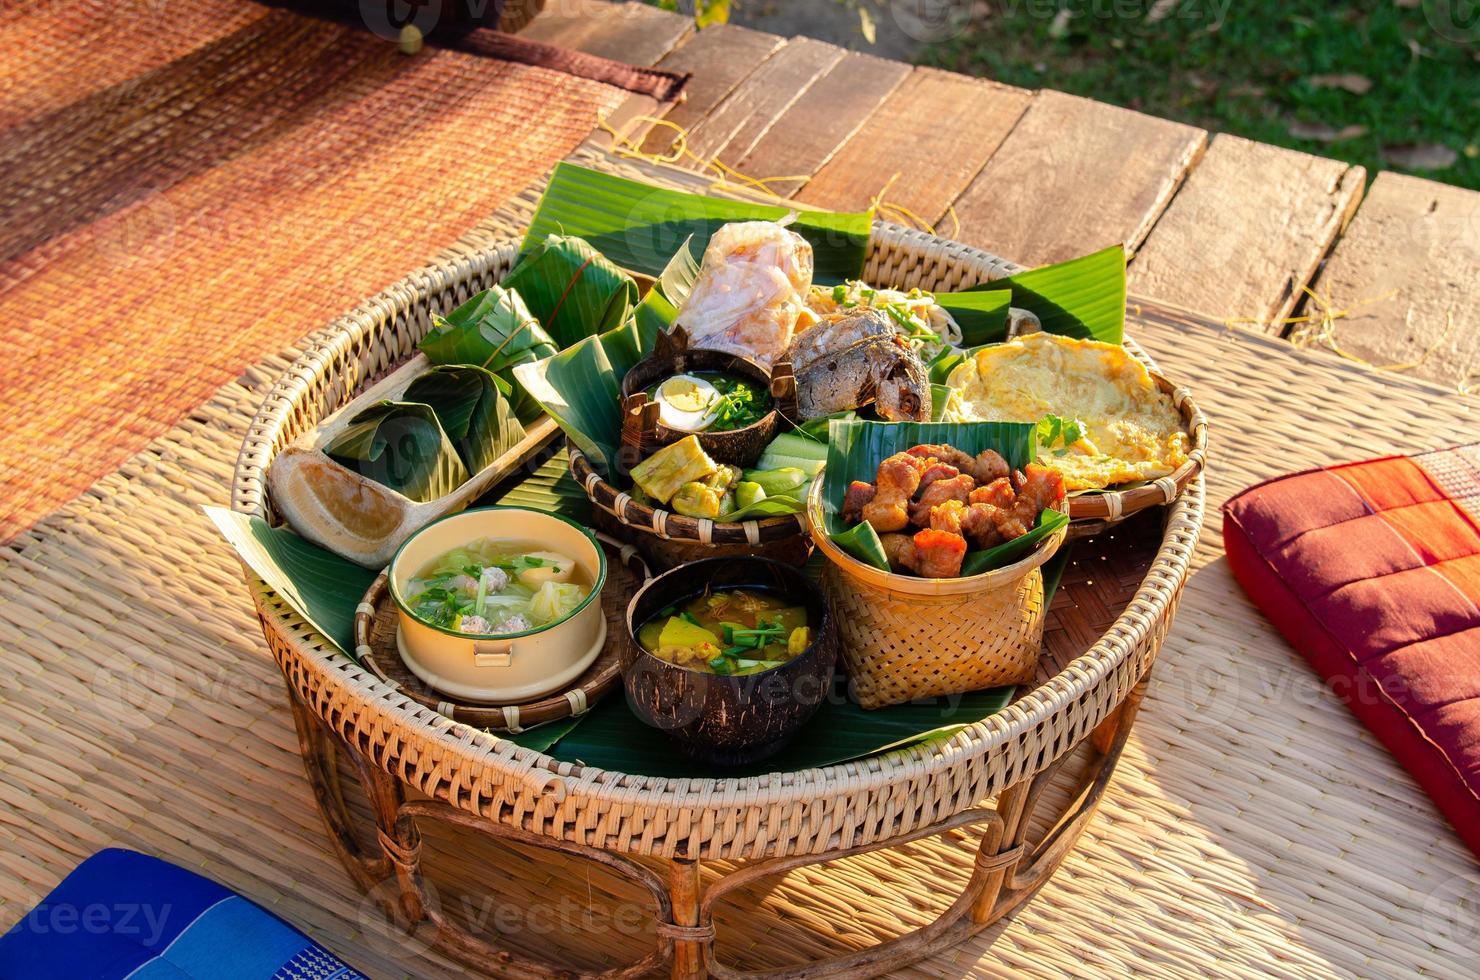 Khantoke, is a pedestal tray used as a small meal table by the Lanna people. A Set of traditional of Thai food in north of Thailand and countryside. photo